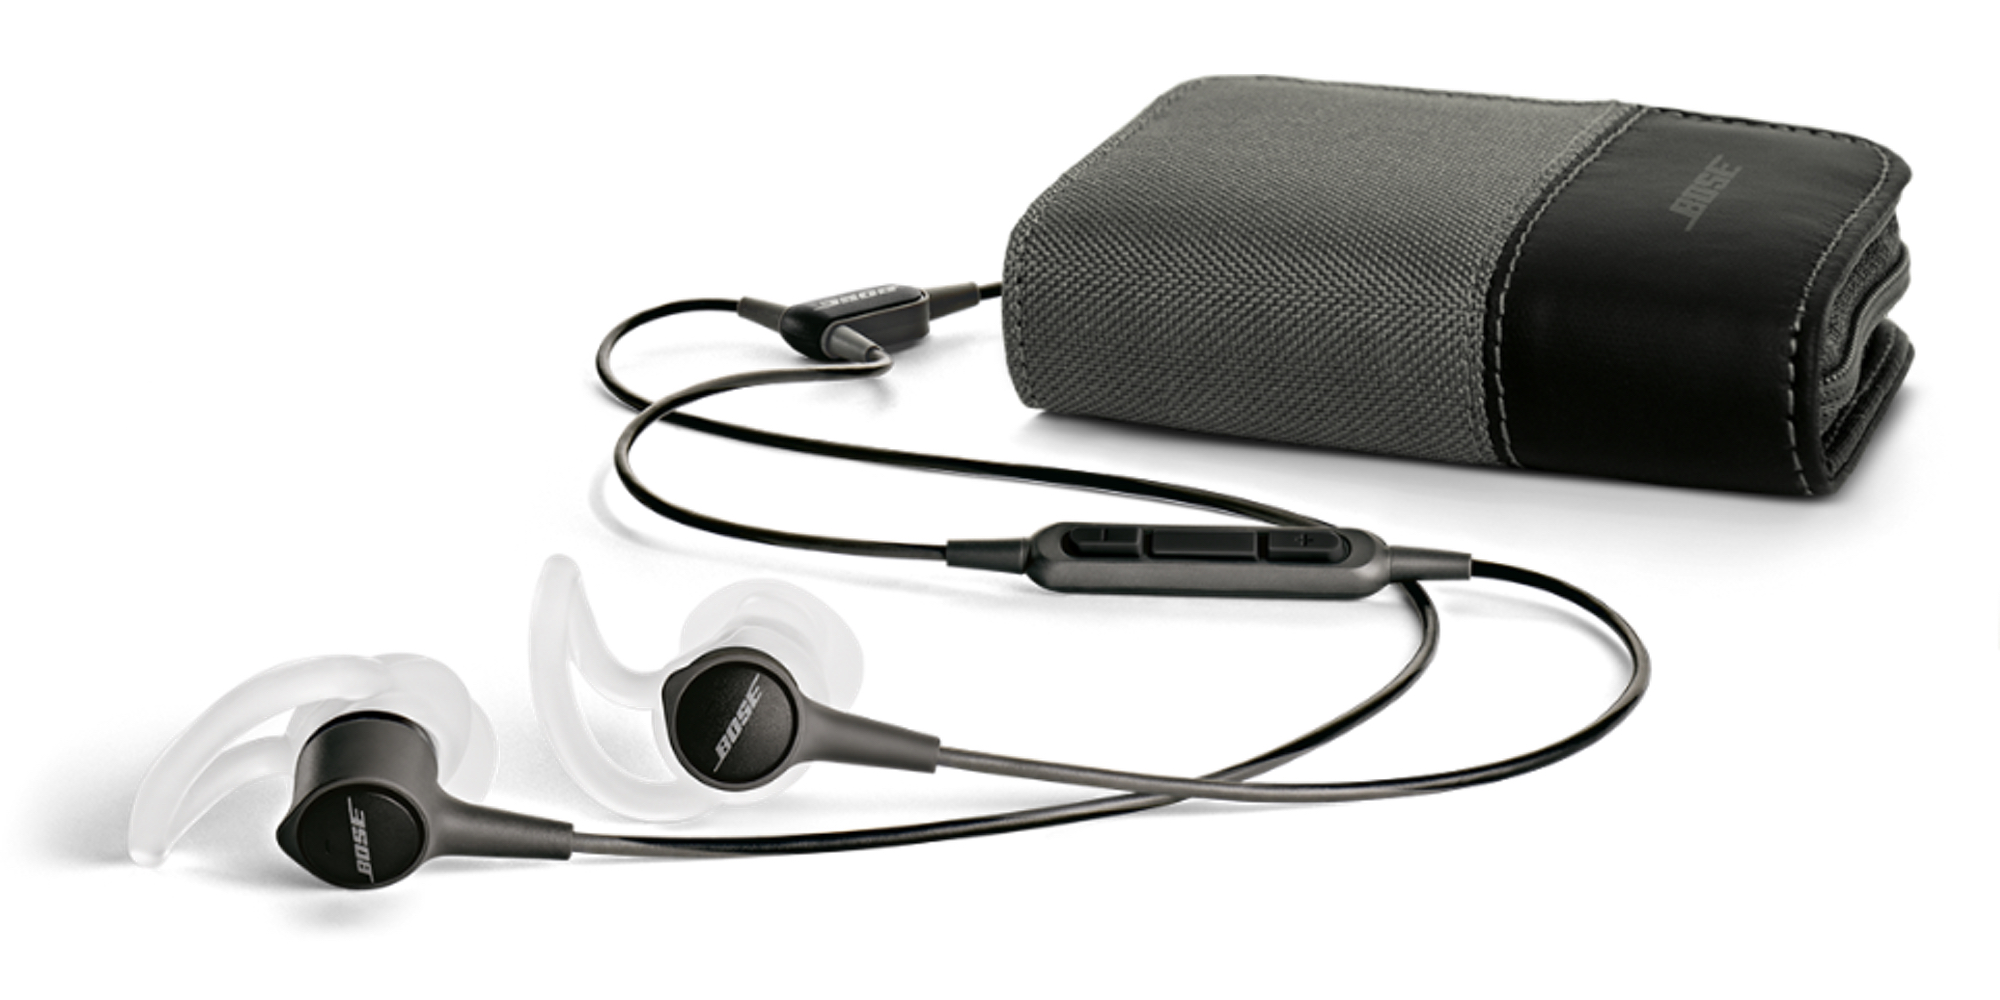  A product image of the Bose Ultra Open Earbuds, a pair of black wireless headphones with a carrying case, available in Indonesia.